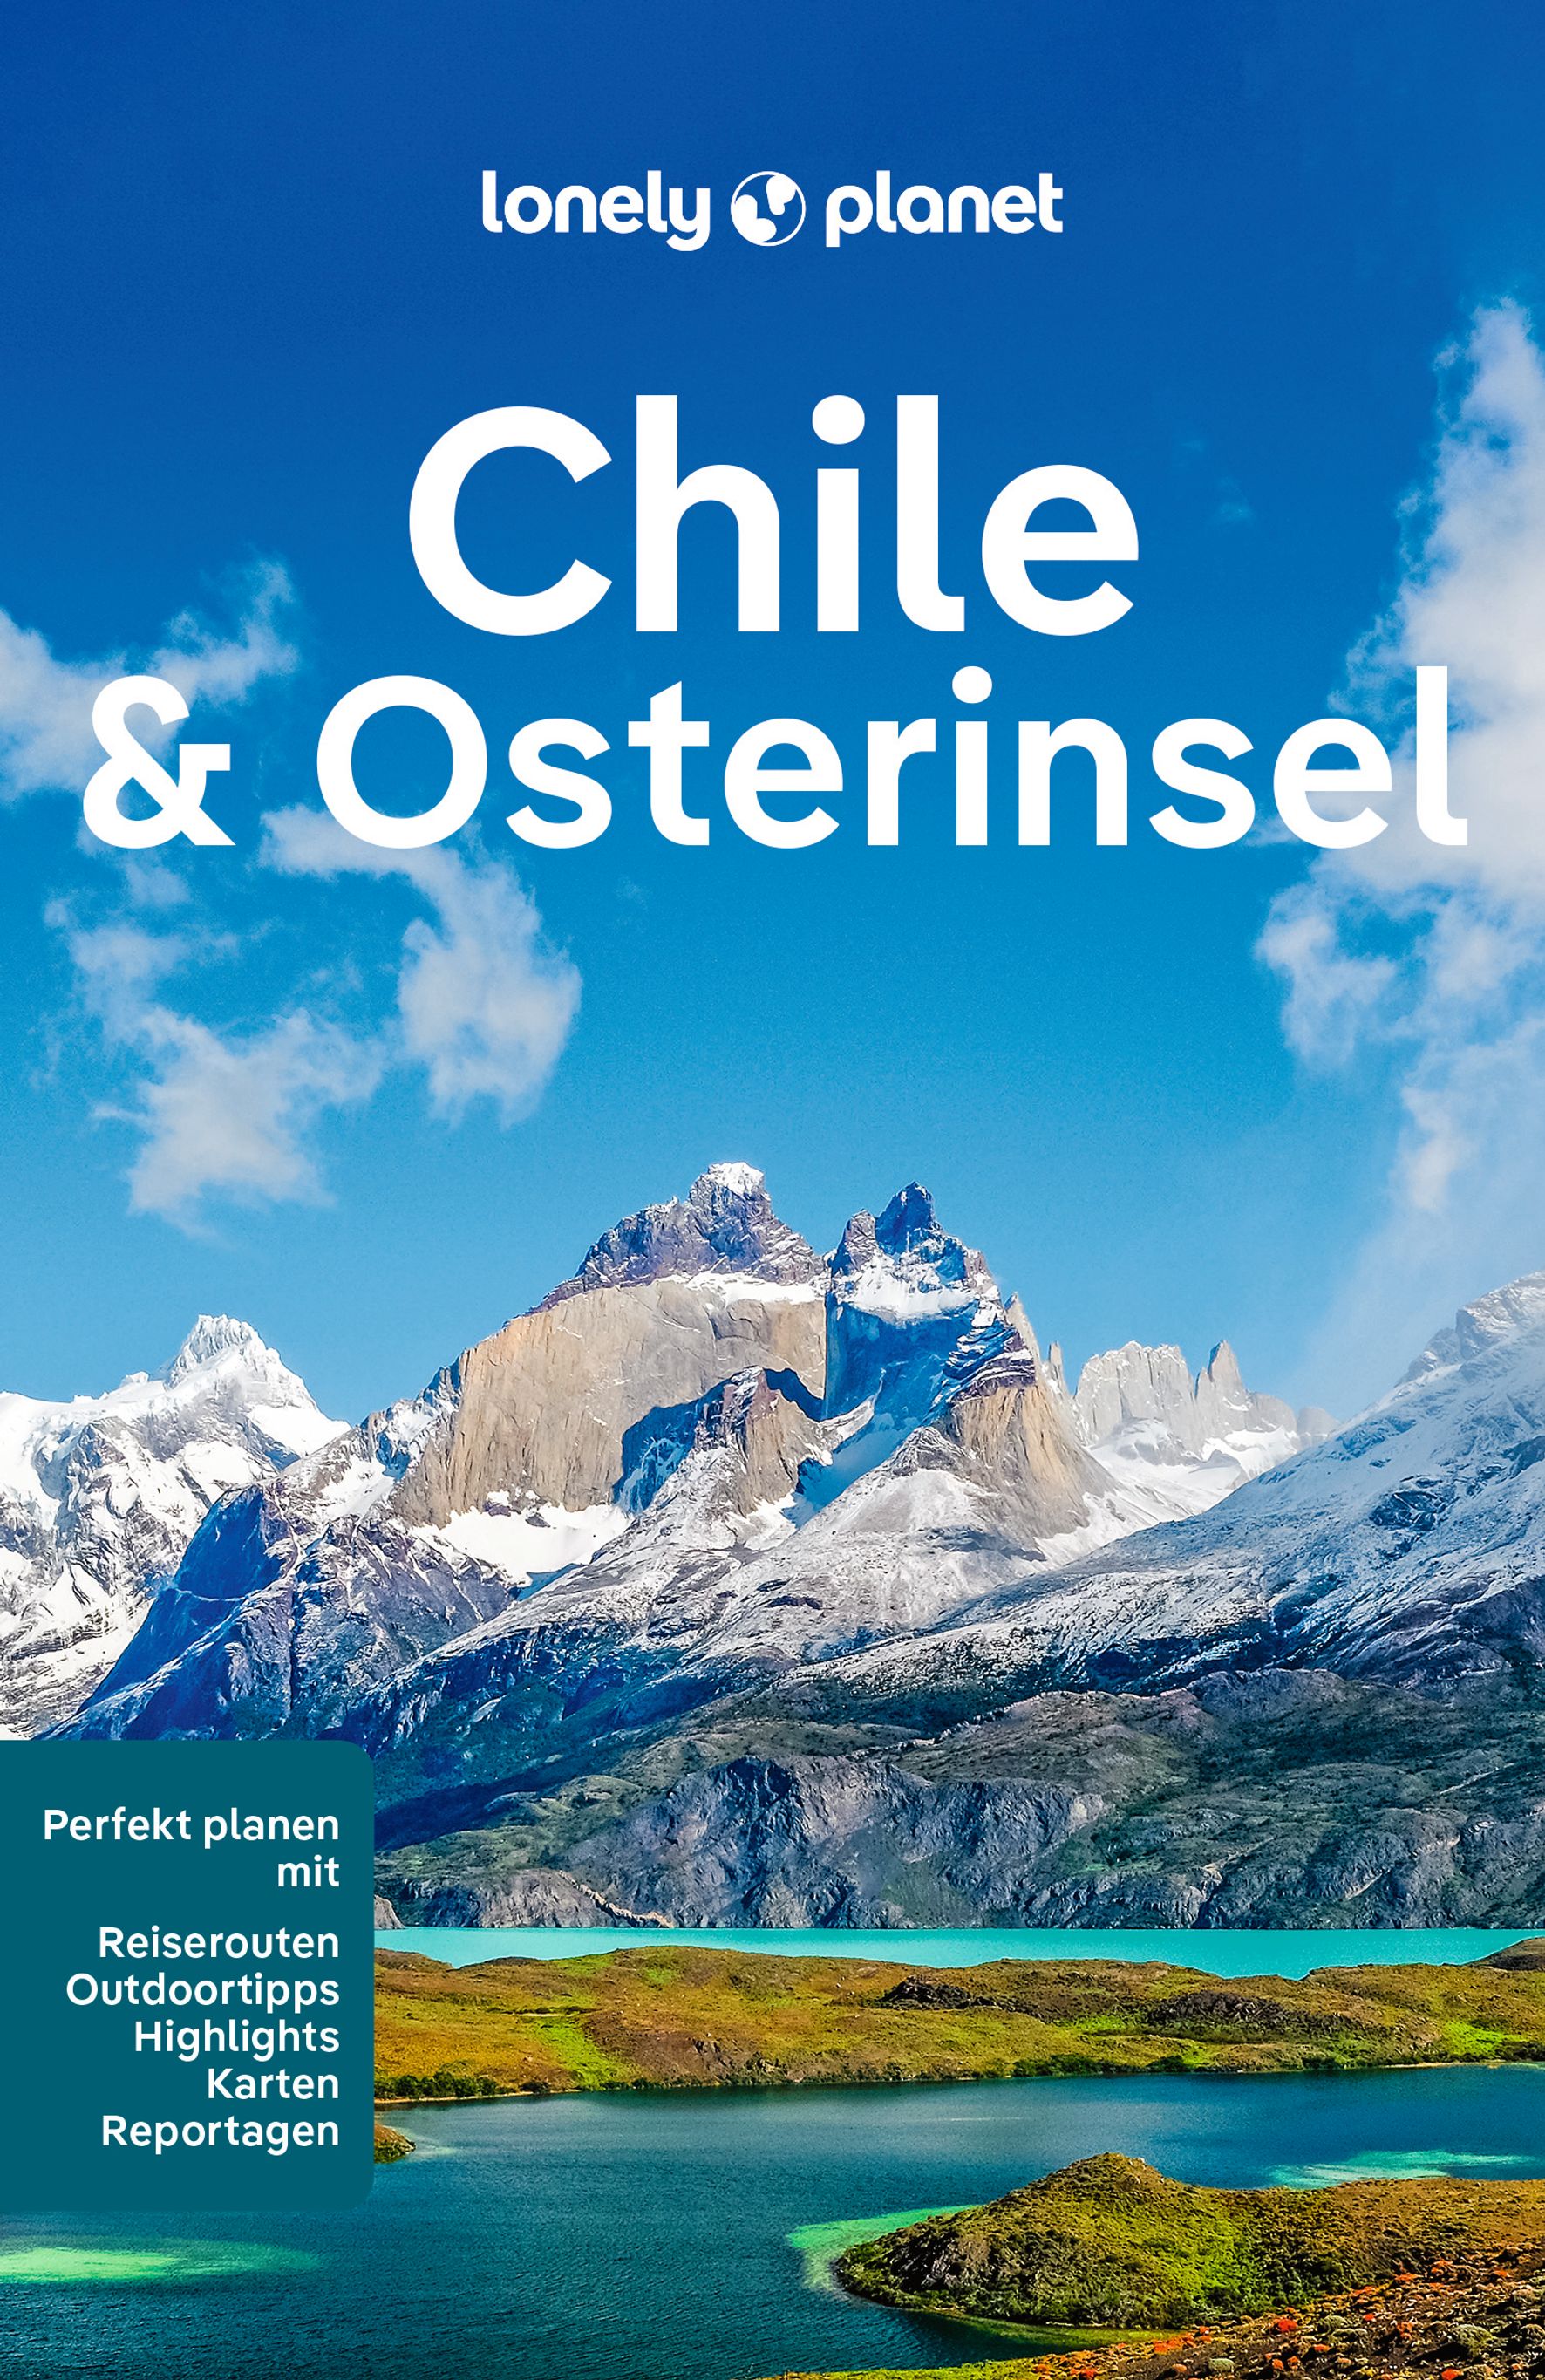 Lonely Planet Chile & Osterinsel